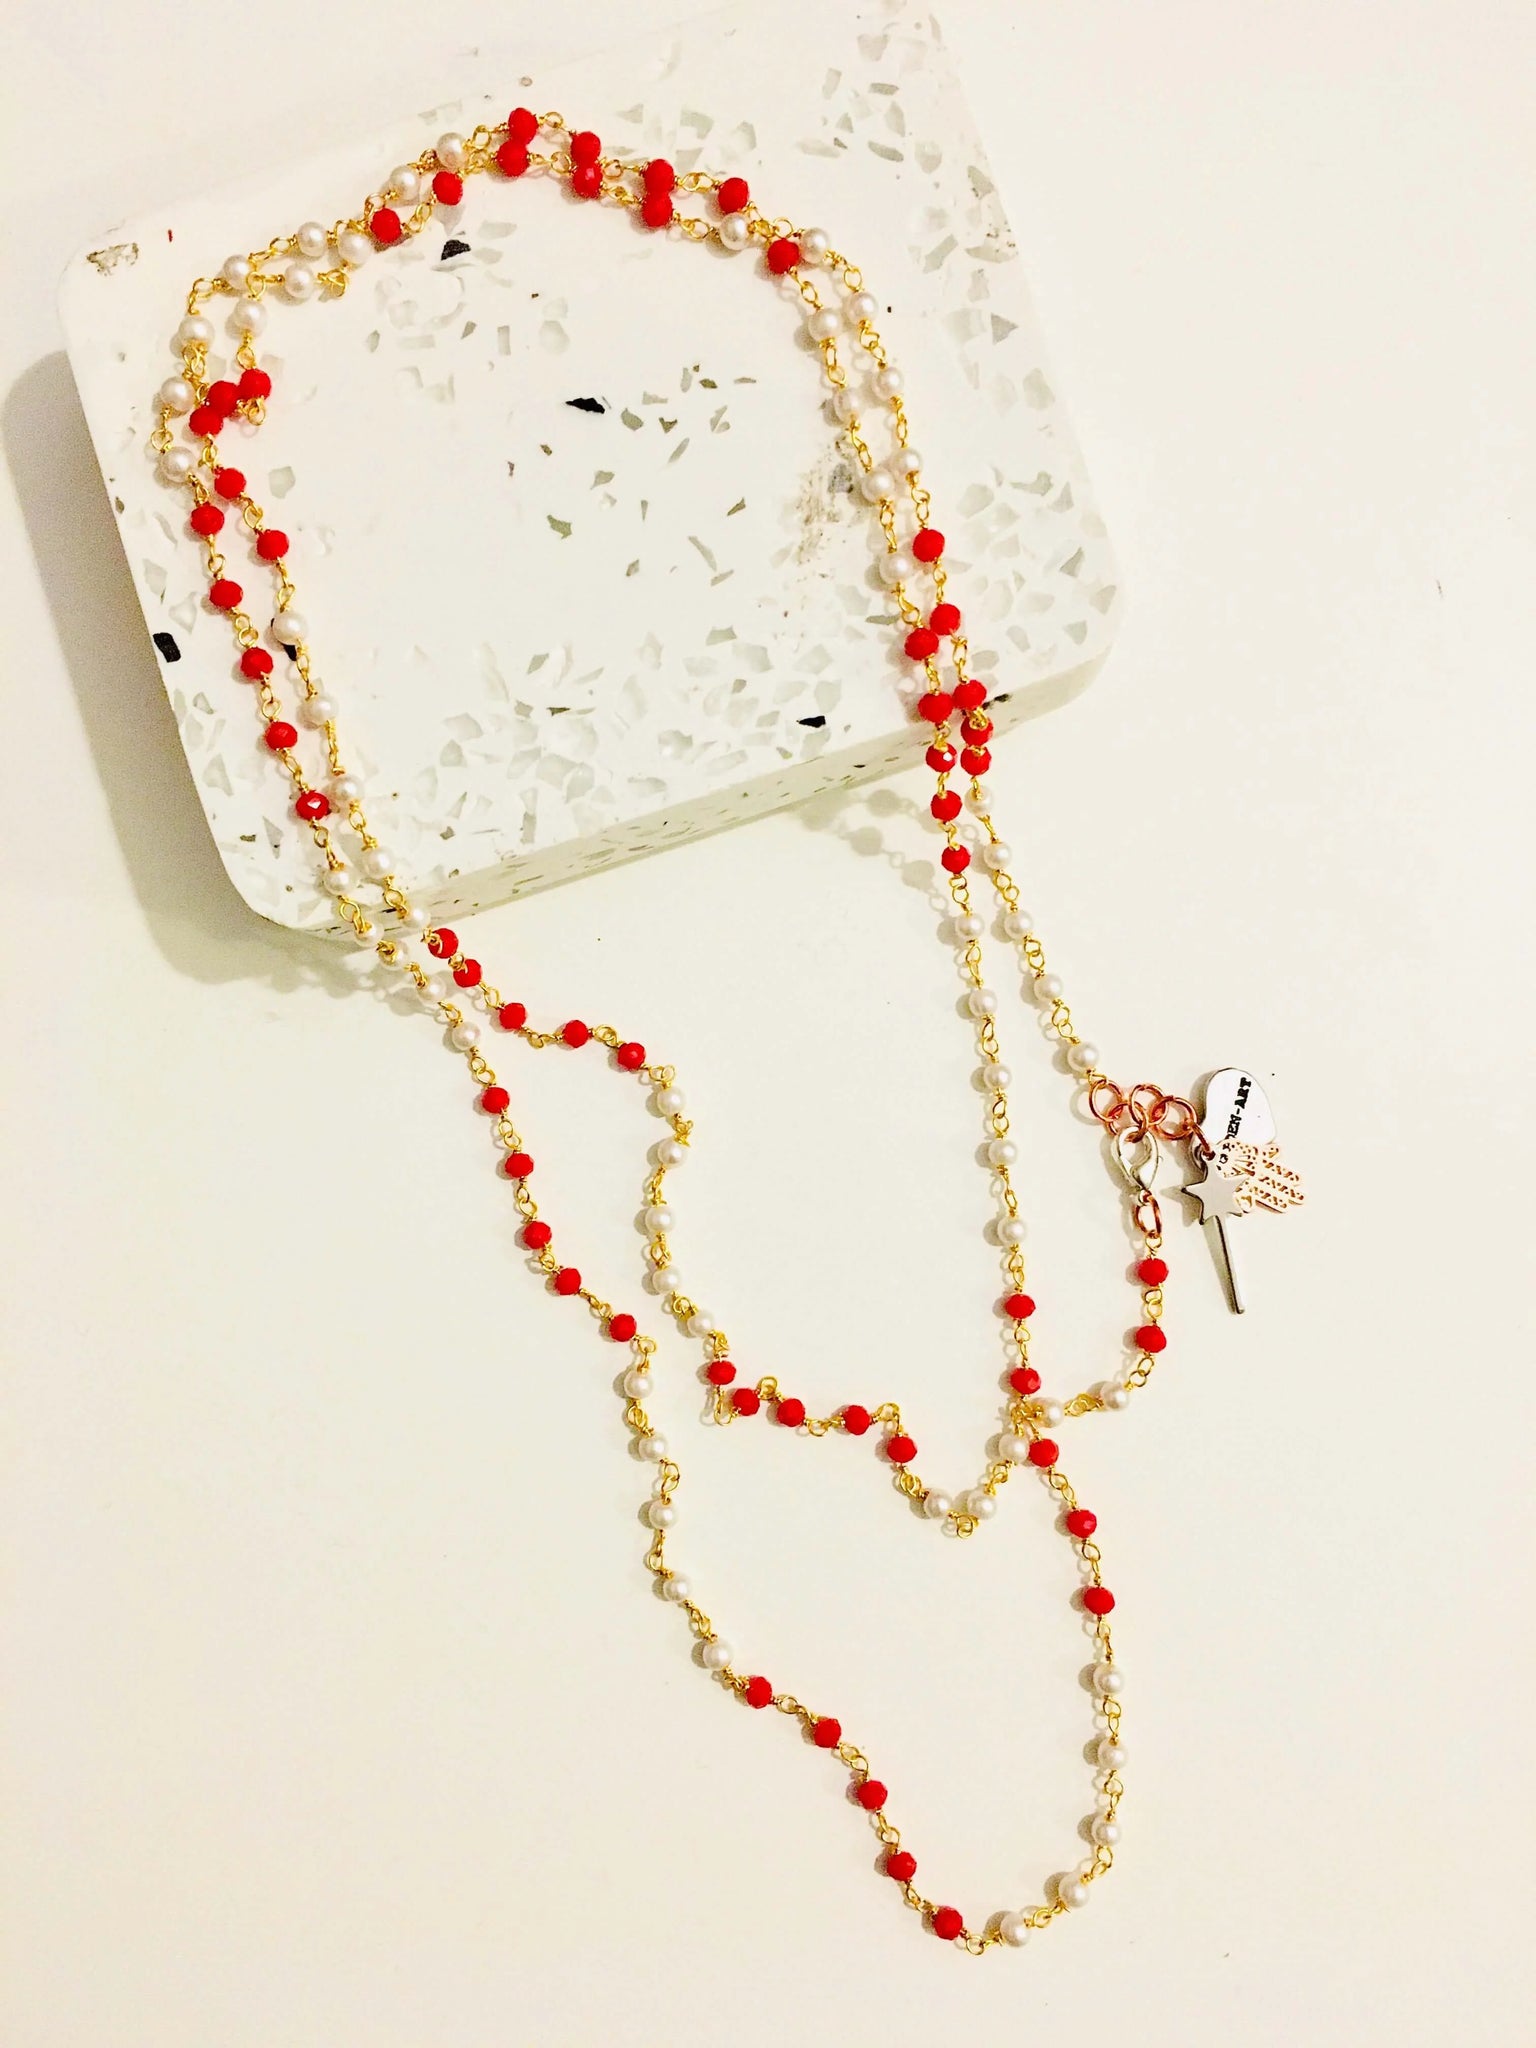 Rosary pearls and red crystals long necklace with magic wand and hamsa charms. - Maiden-Art